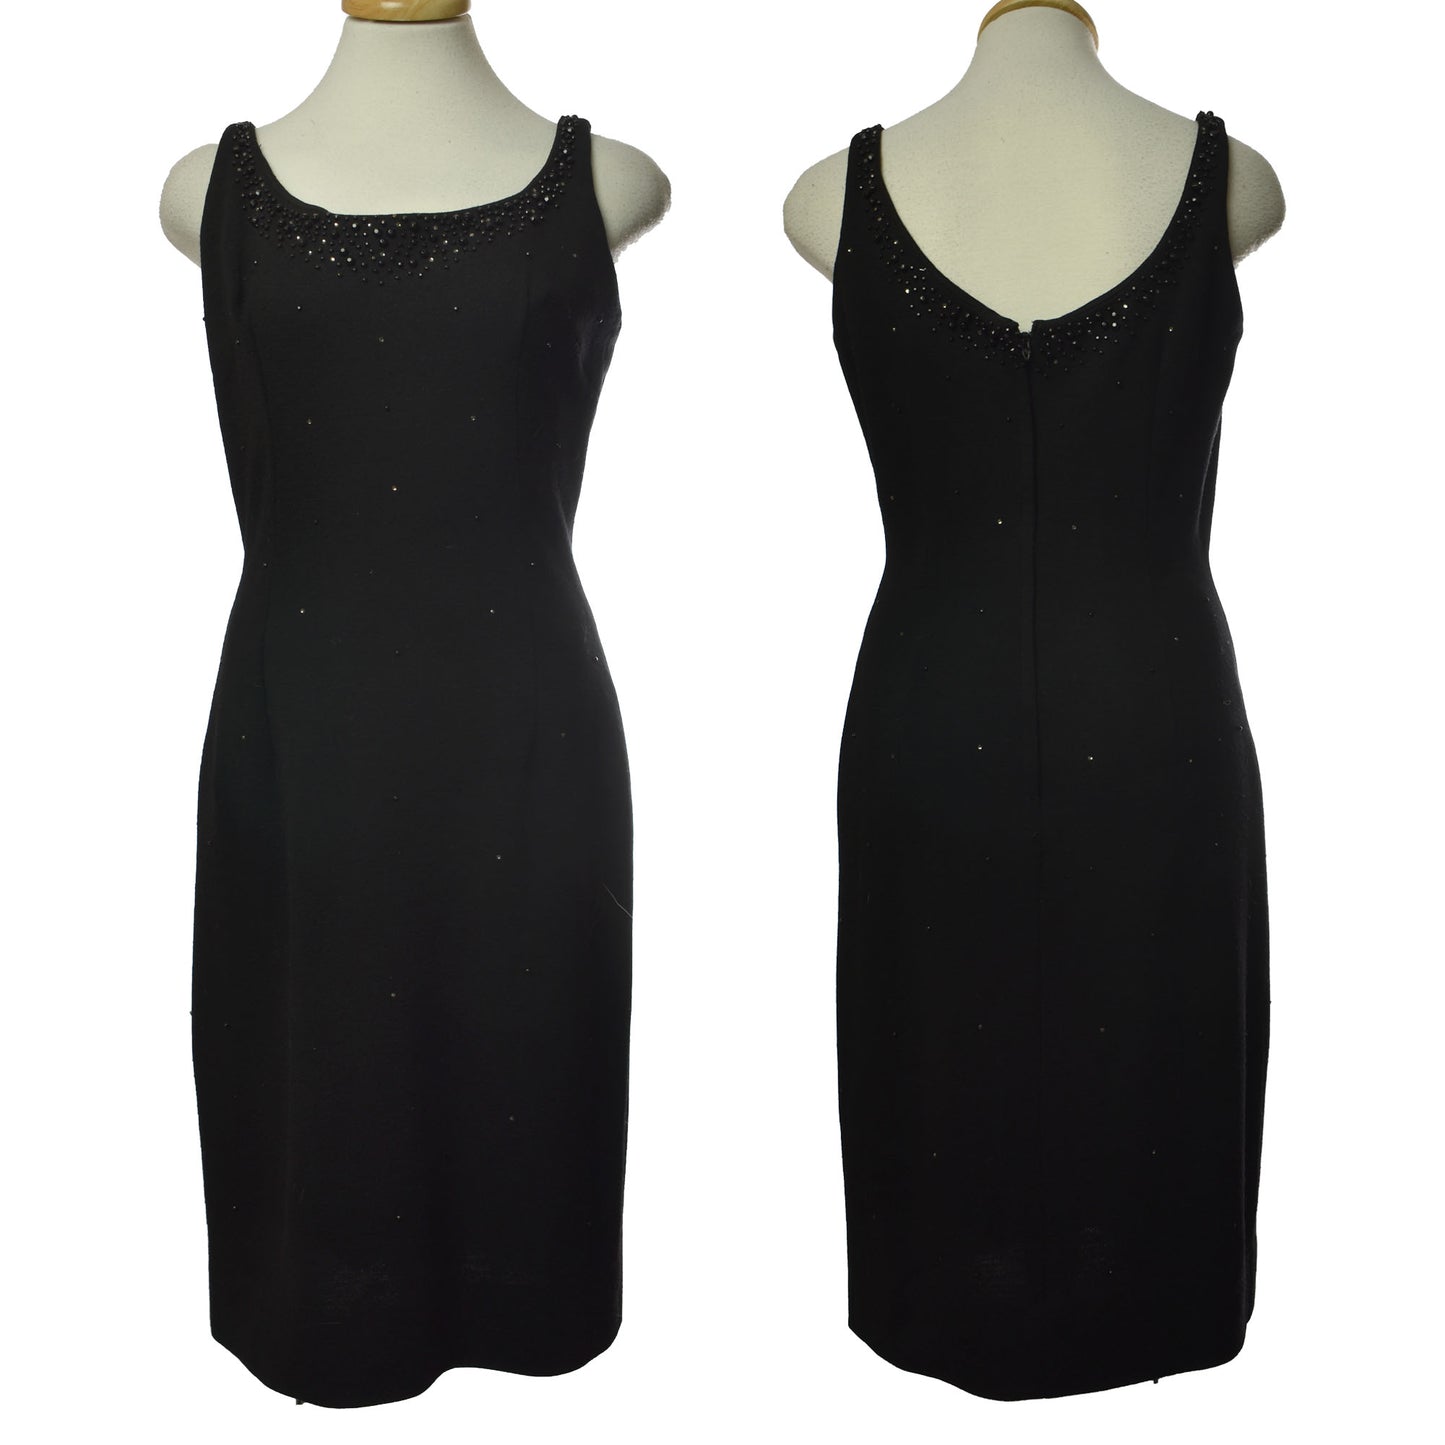 Vintage 50s Union Made Wool Sleeveless Black Zipperback Dress with Black Stud and Crystal Detail